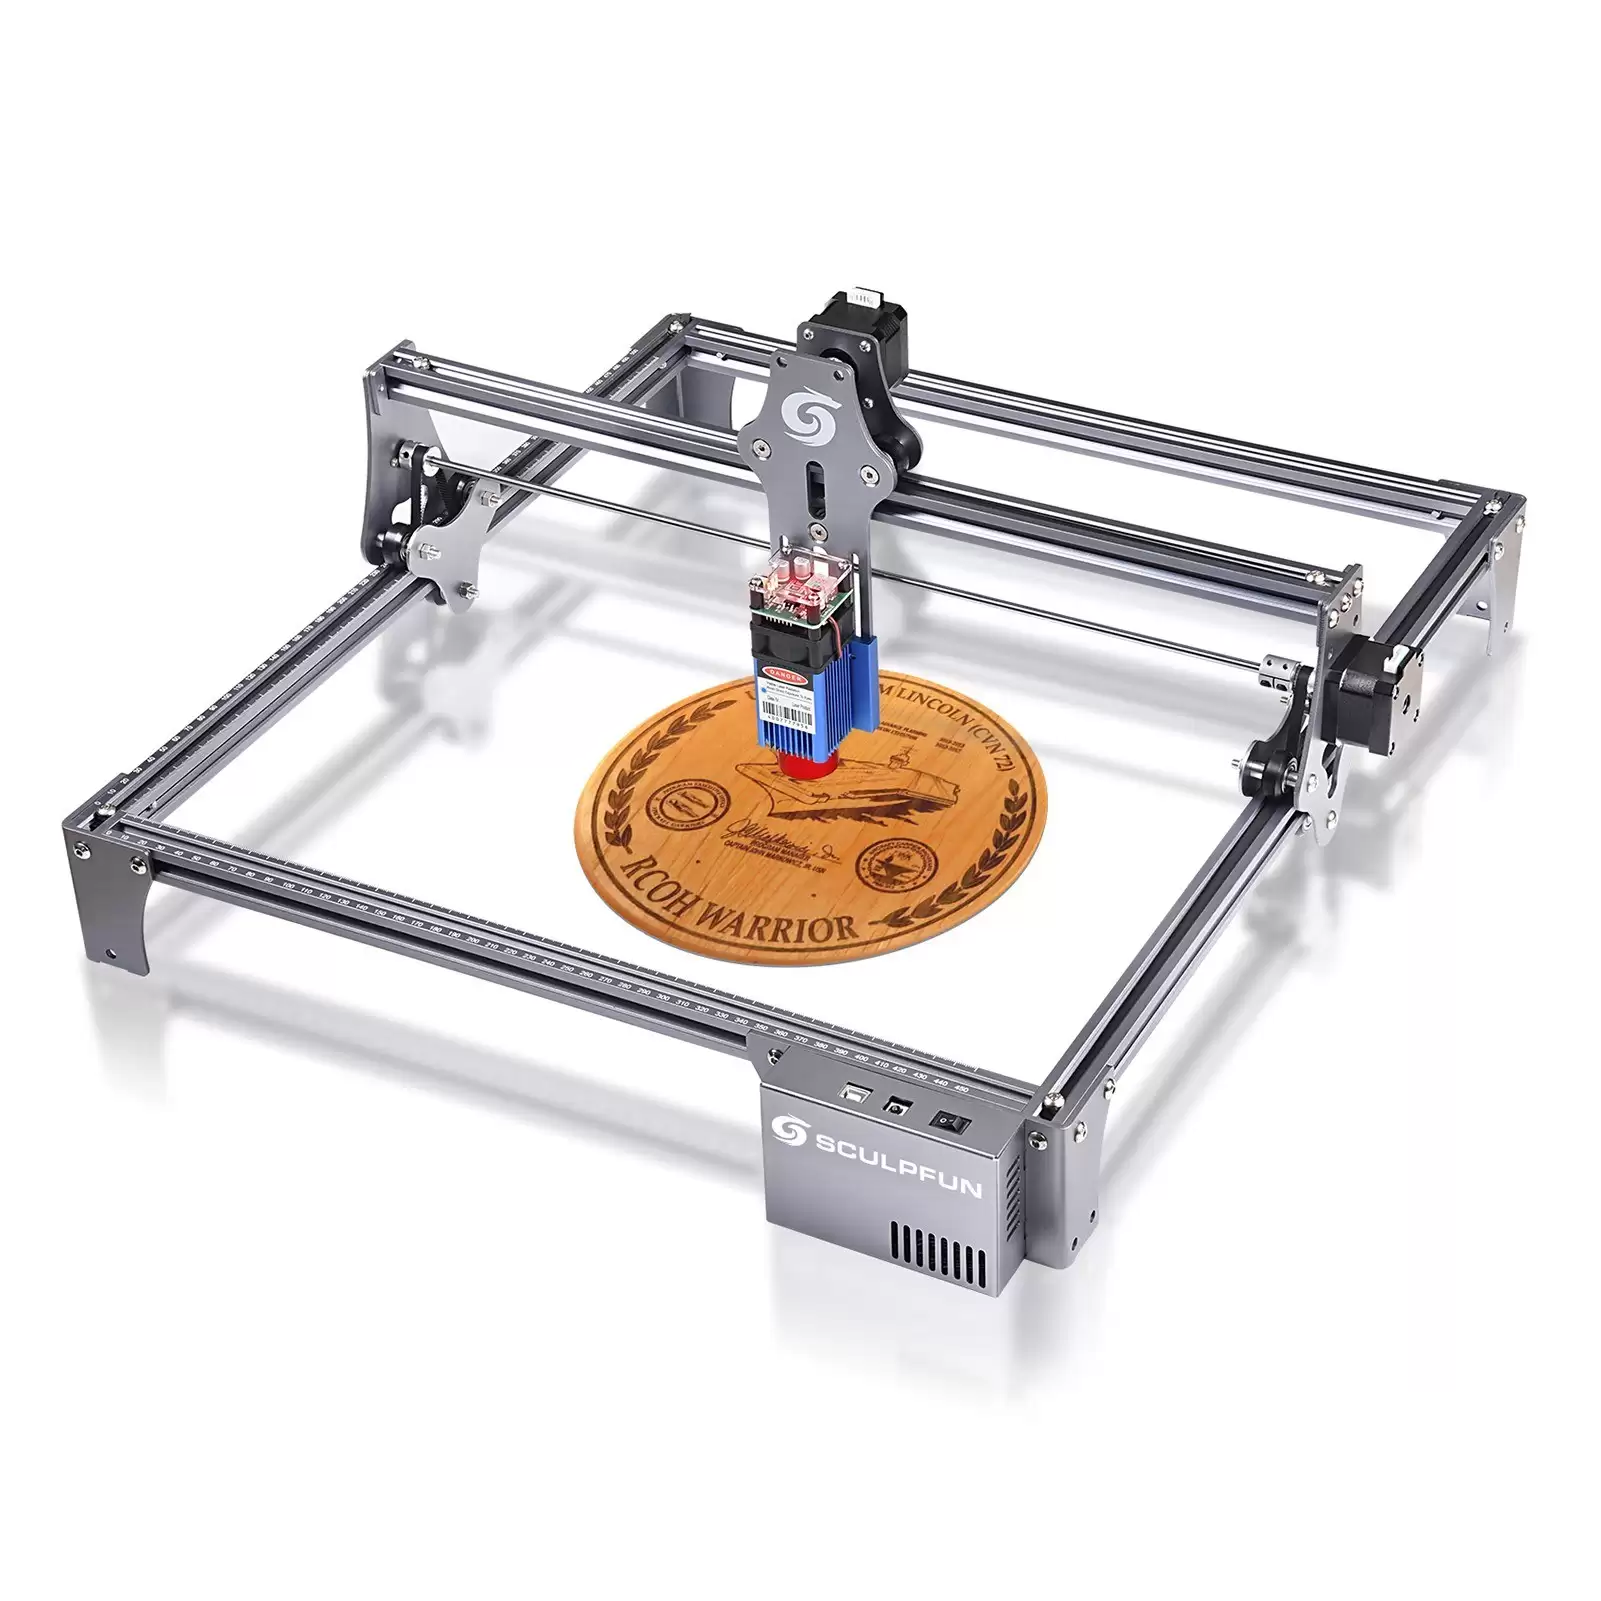 Get $99 Discount On Sculpfun S6 30w Laser Engraver, Free Shipping $246 With This Discount Coupon At Tomtop